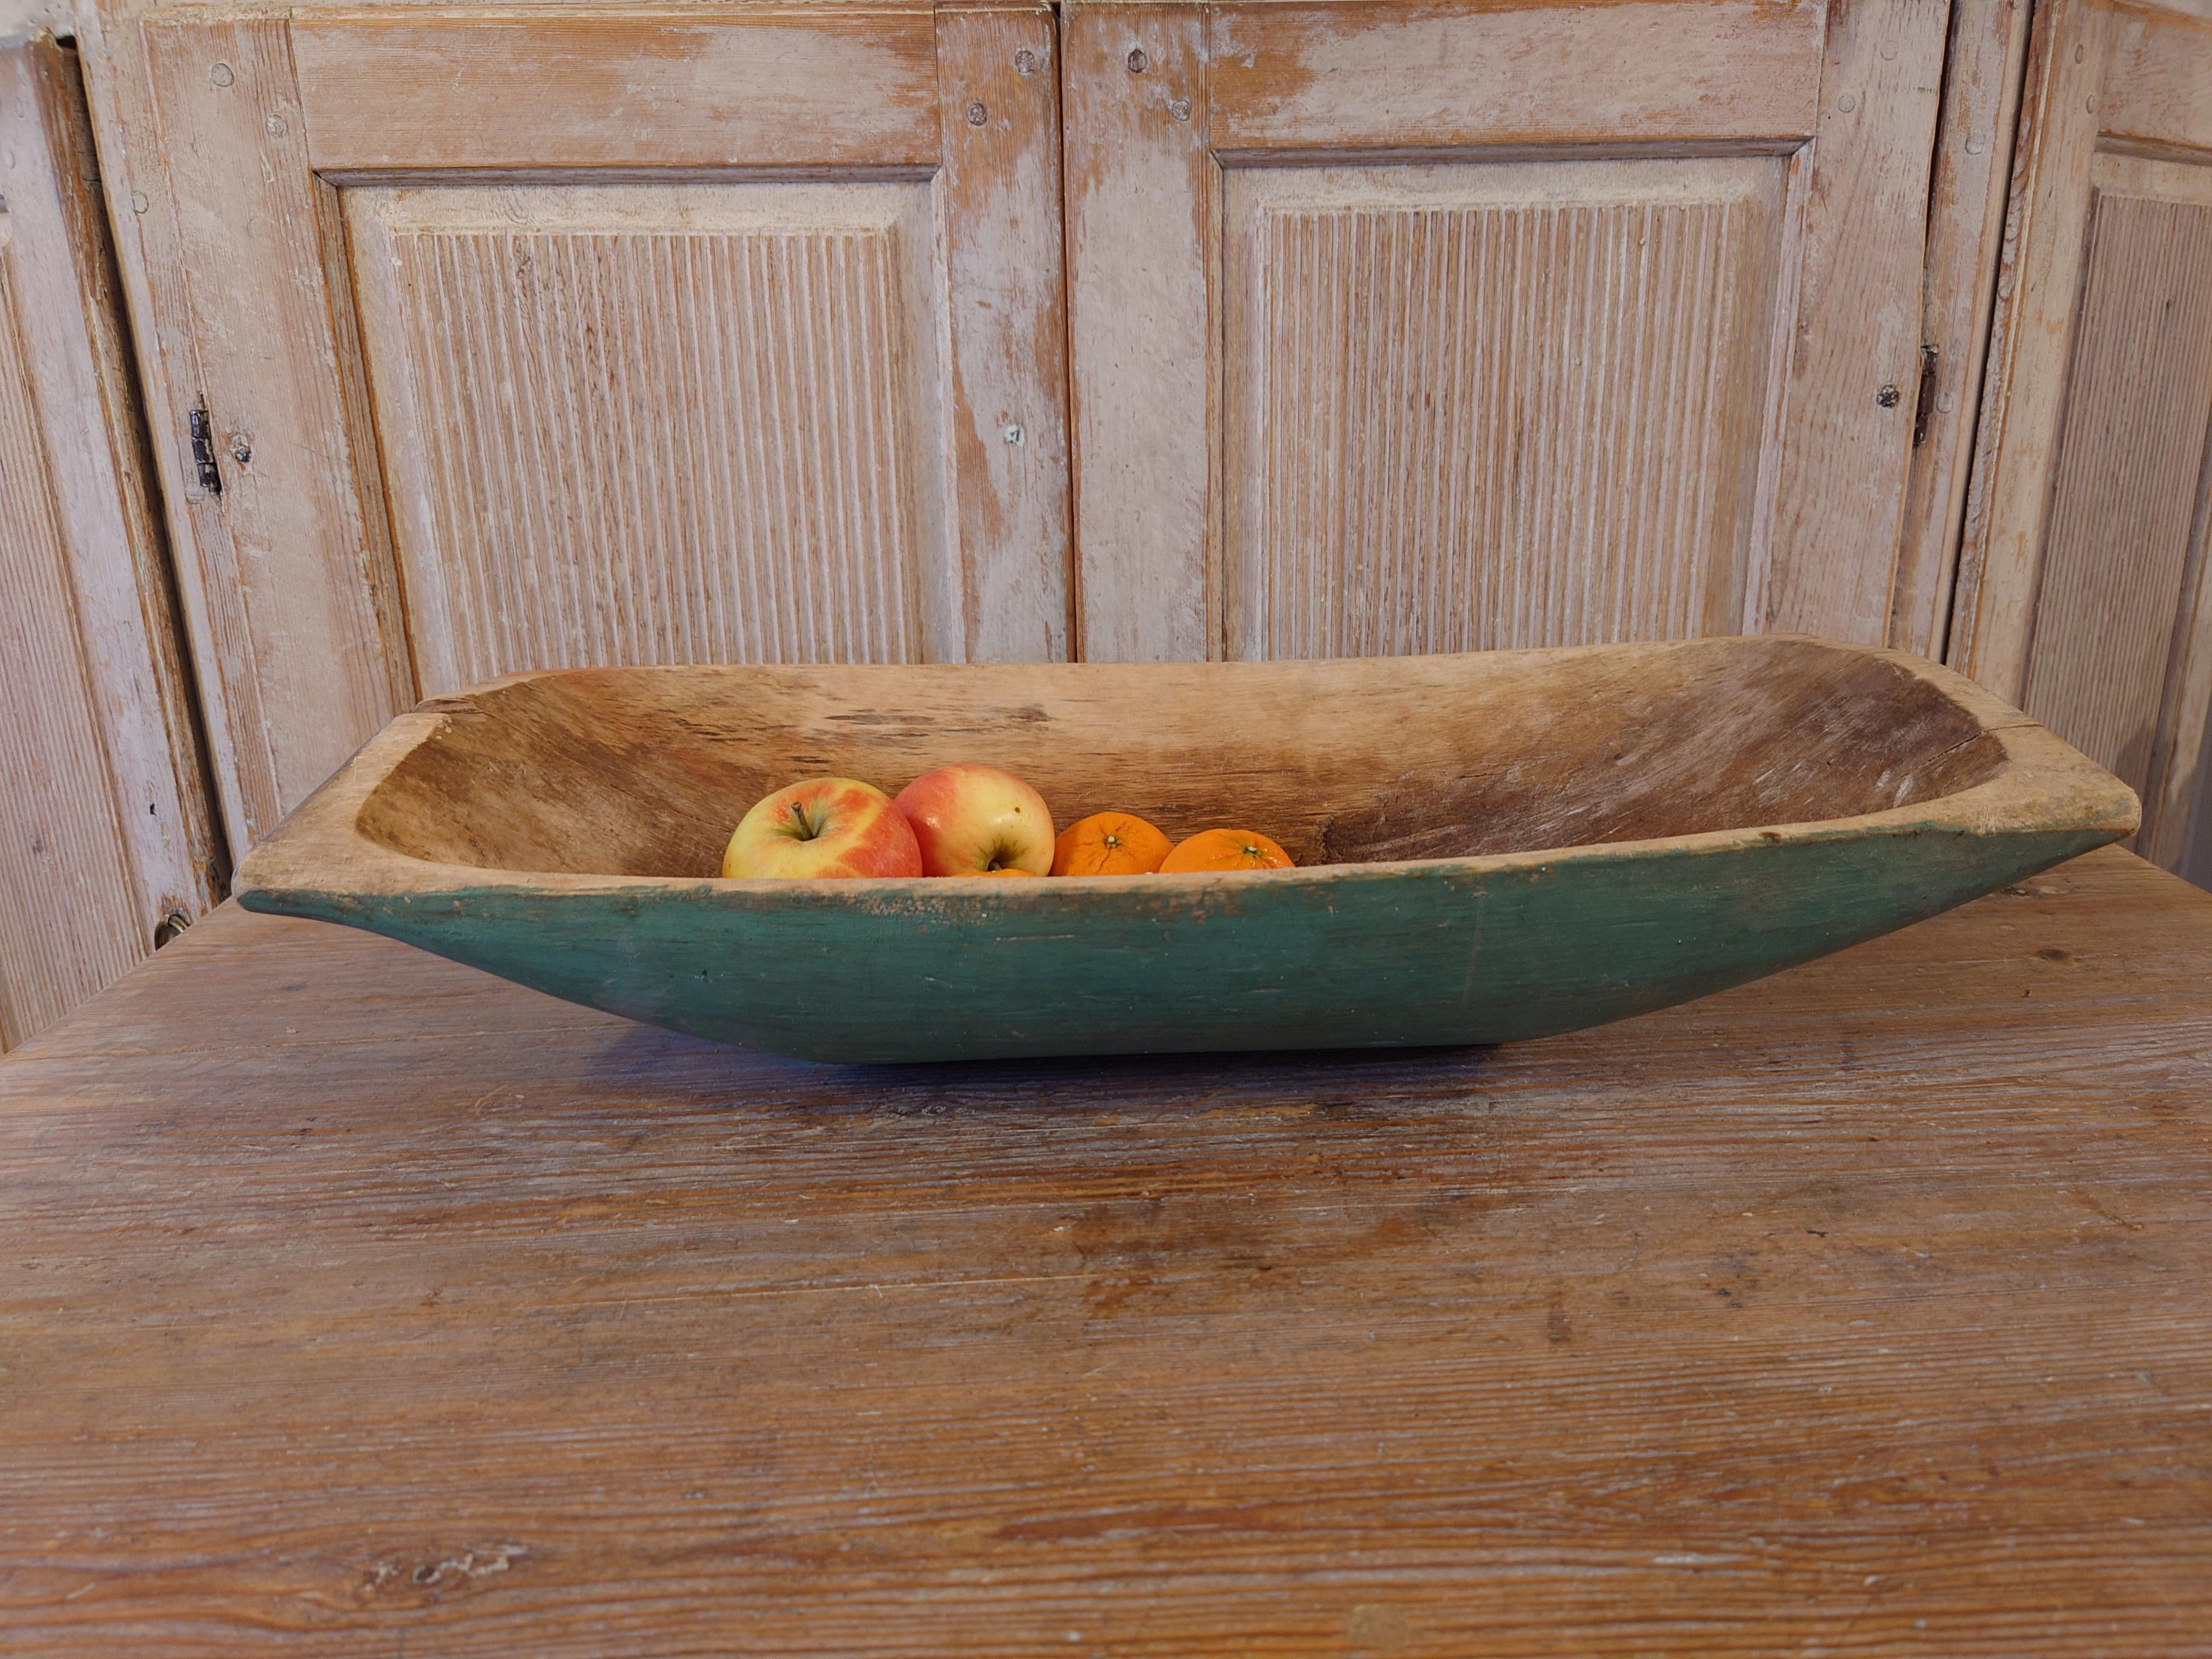 19th Century Swedish antique wooden tray /Serving bowl with untouched original paint.
Lovely patina.
A large farmers handcrafted tray or serving bowl or centerpiece.
A highly functional object with scurptural appearance.
Good antique condition with